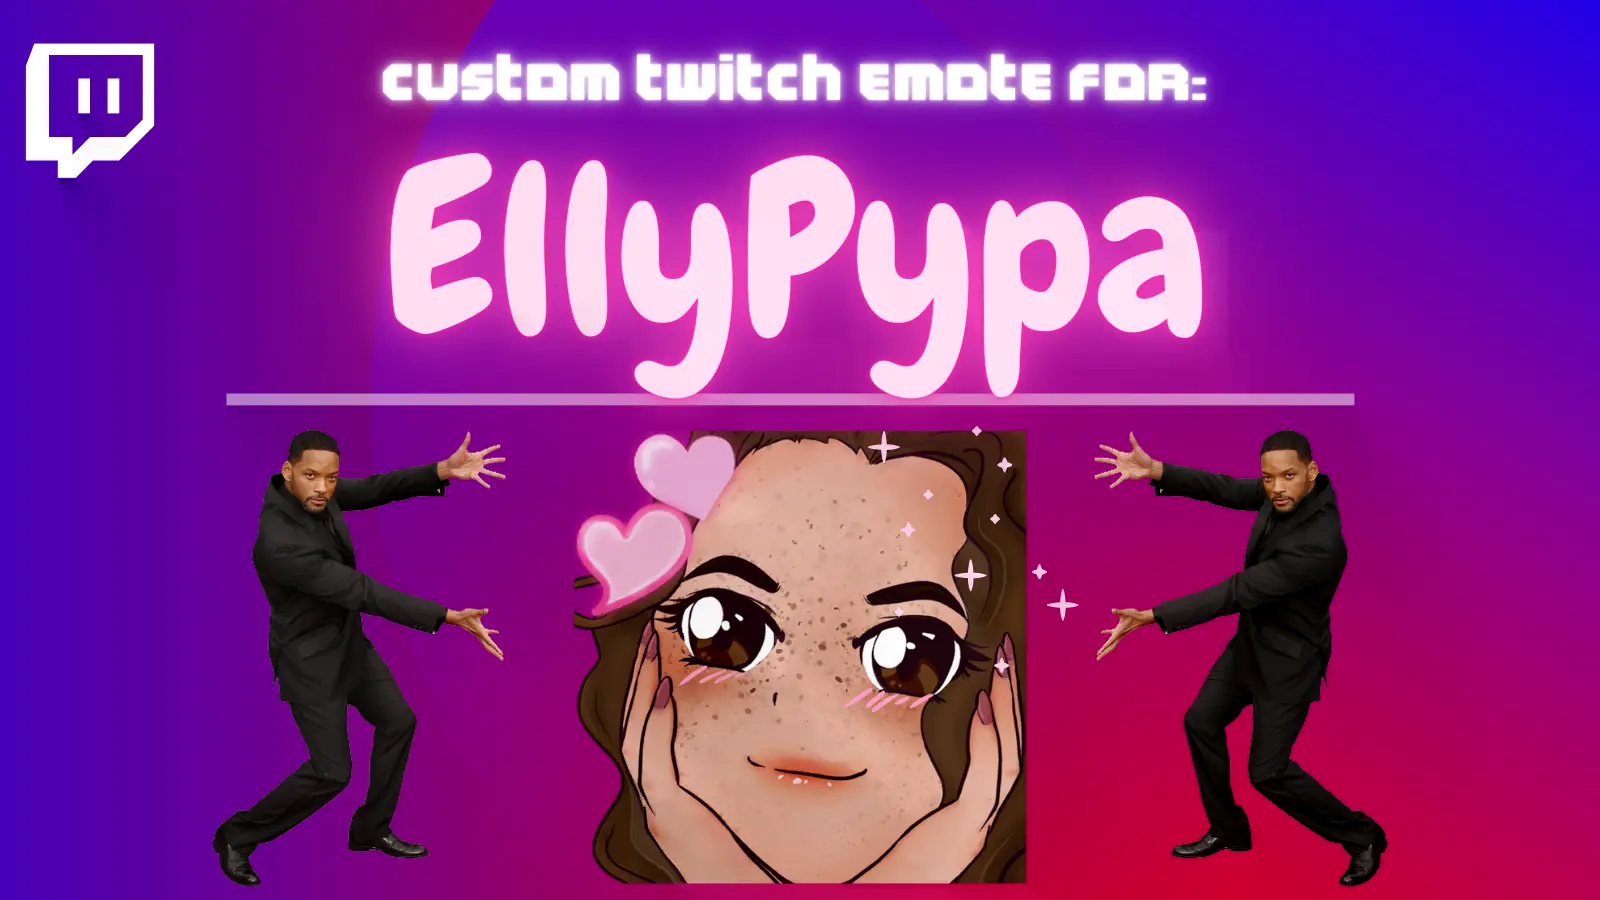 An Emote of EllyPypa's face for EllyPypa on Twitch